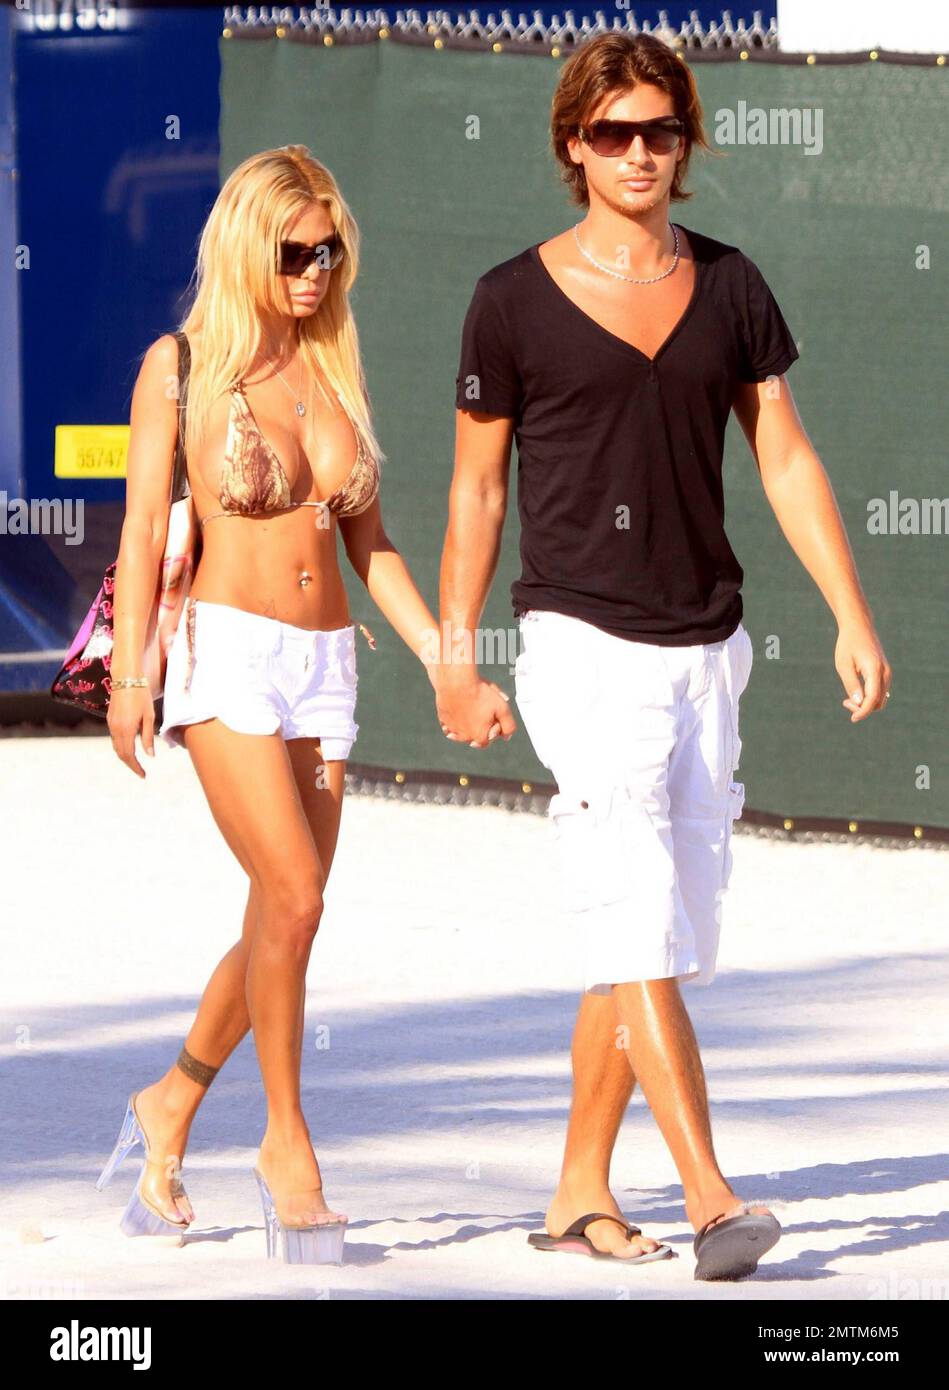 Former Playboy Playmate Shauna Sand carries a Barbie handbag and wears her  lucite heels as she takes a morning stroll on the beach with new husband  Laurent. Shauna looked to be walking